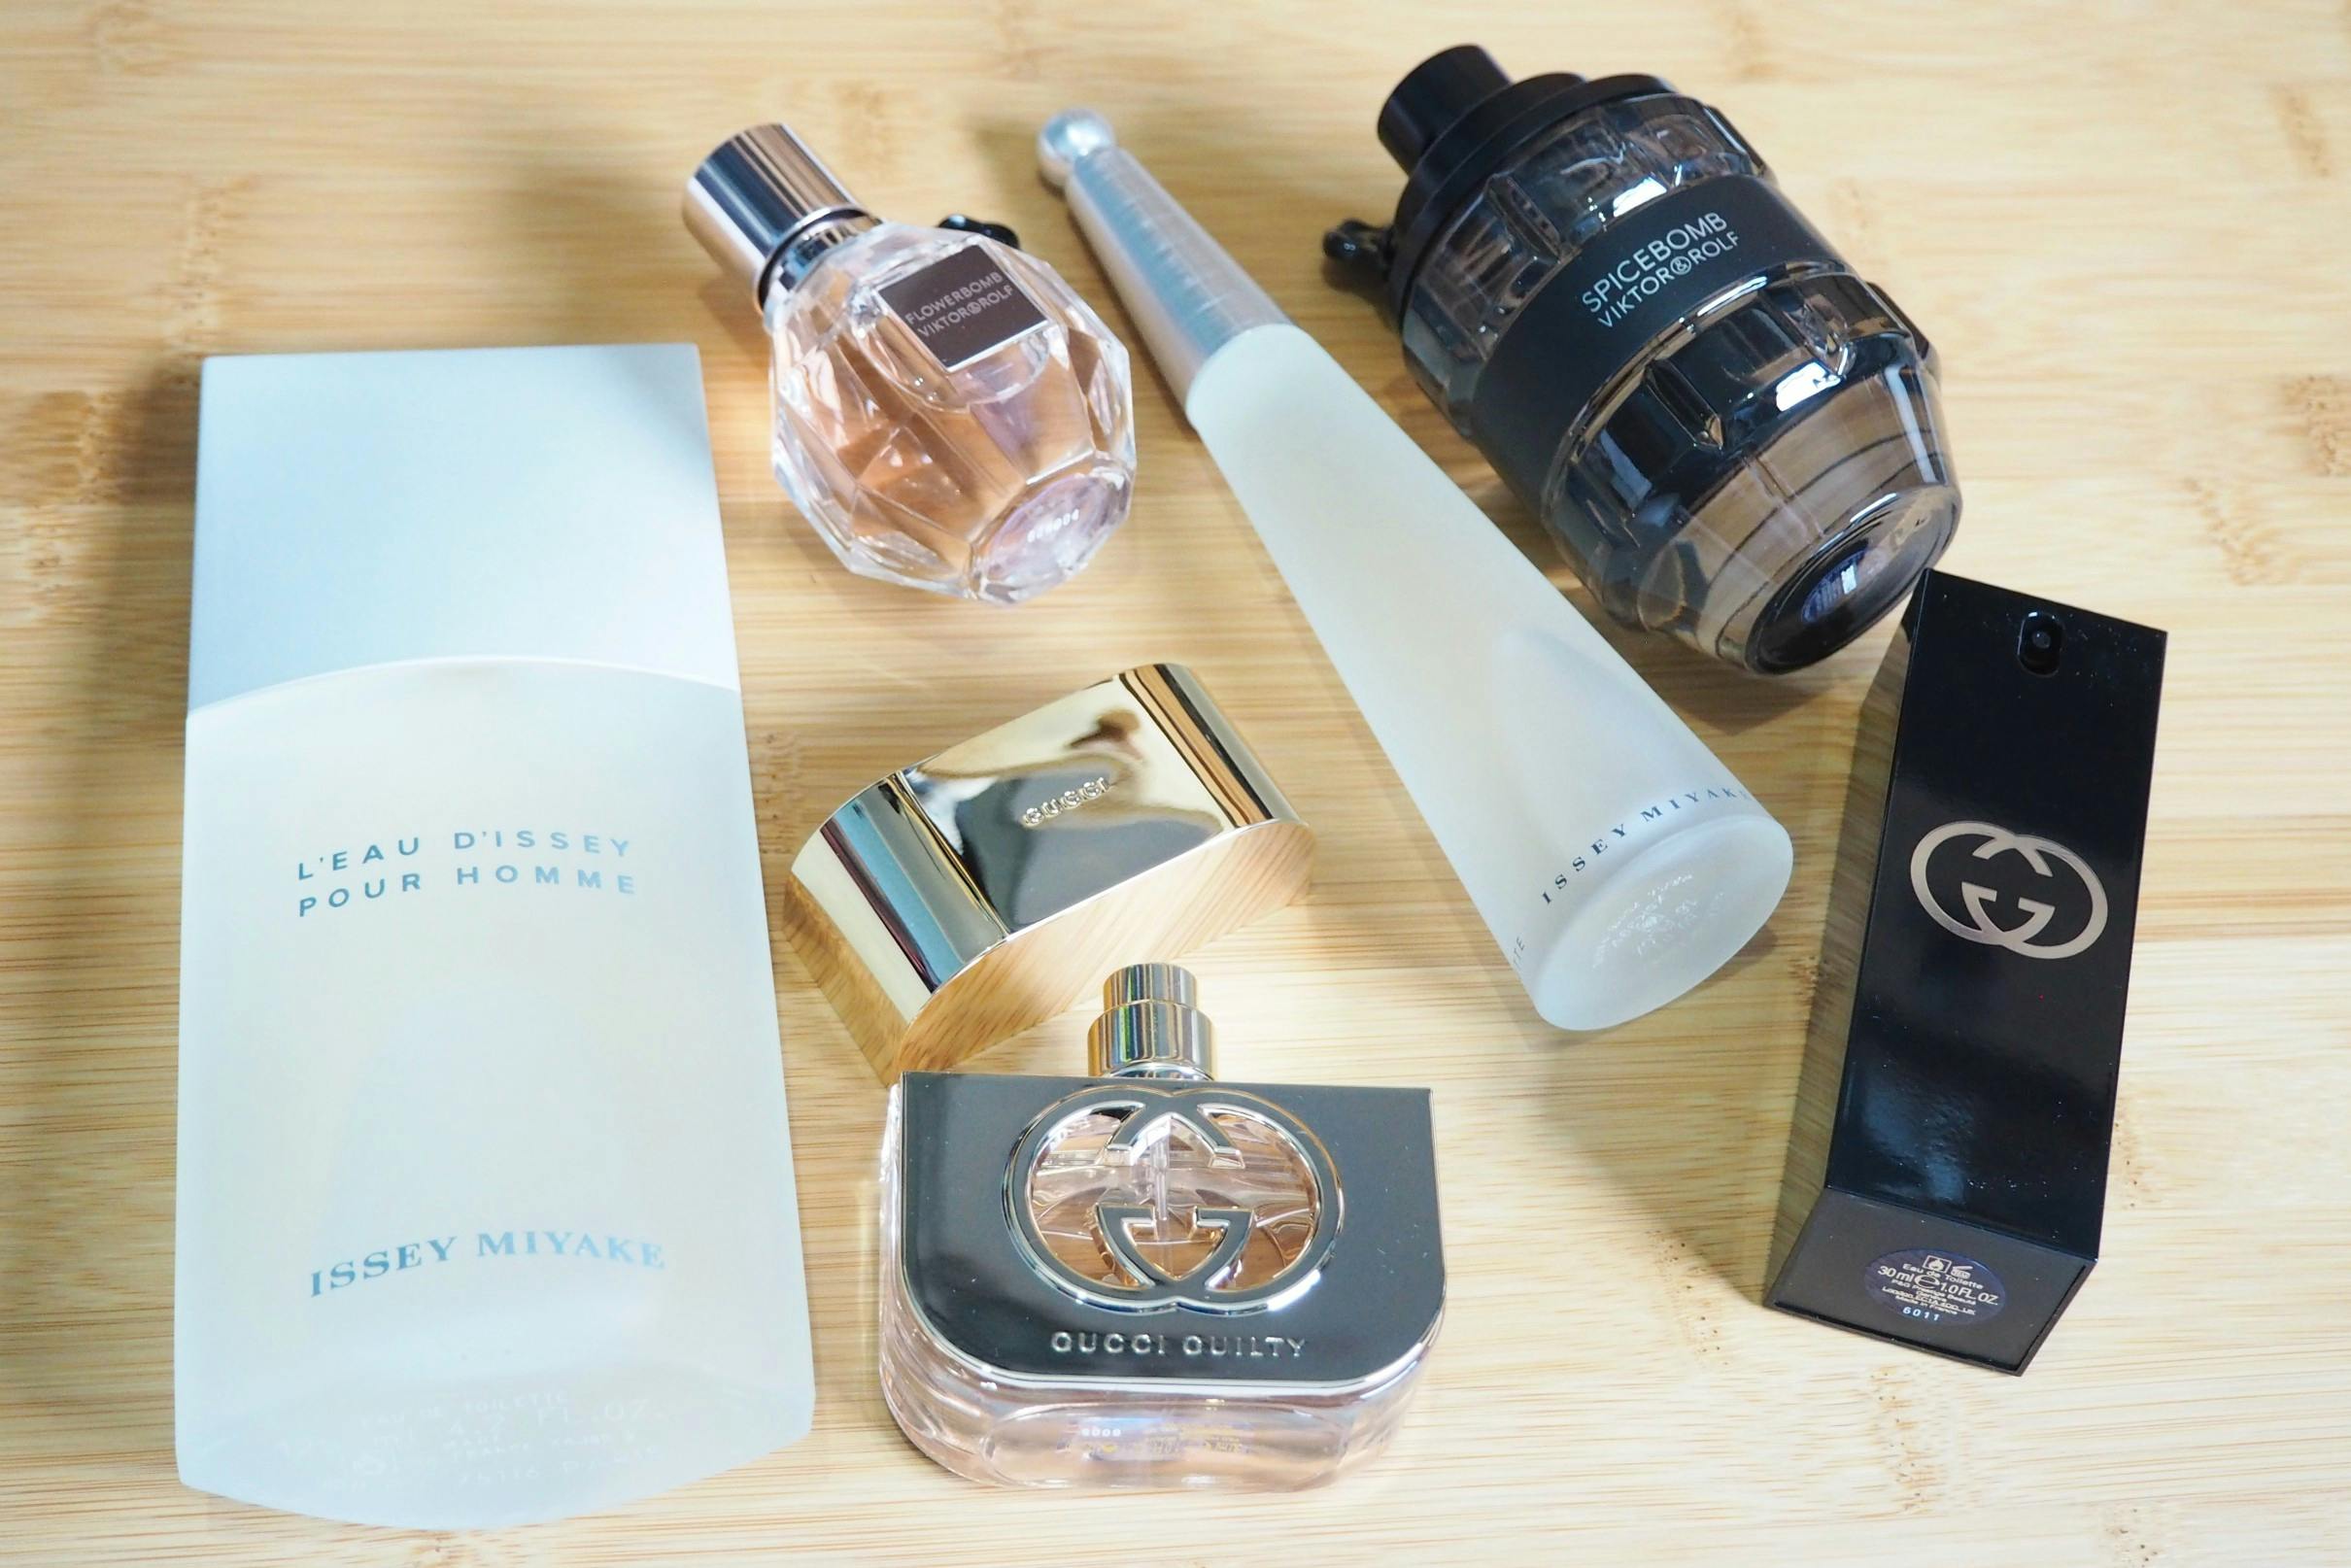 gucci-guilty-issey-miyake-viktor-rolf-fragrances-perfume-cologne-aftershave